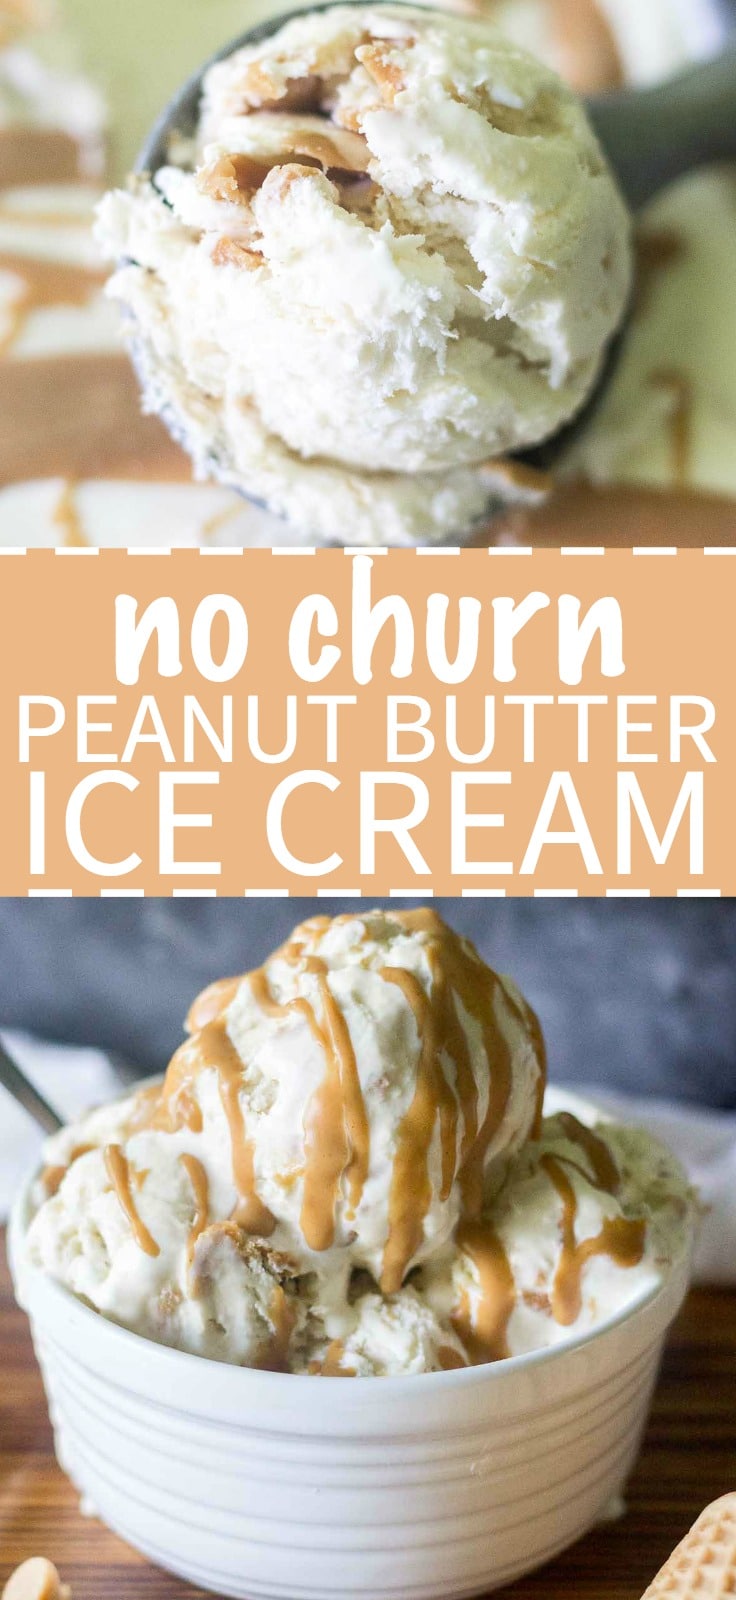 Is there every a wrong time for no churn peanut butter ice cream? It's always smooth, creamy and swirled with real peanut butter. You should make this ice cream all summer long.